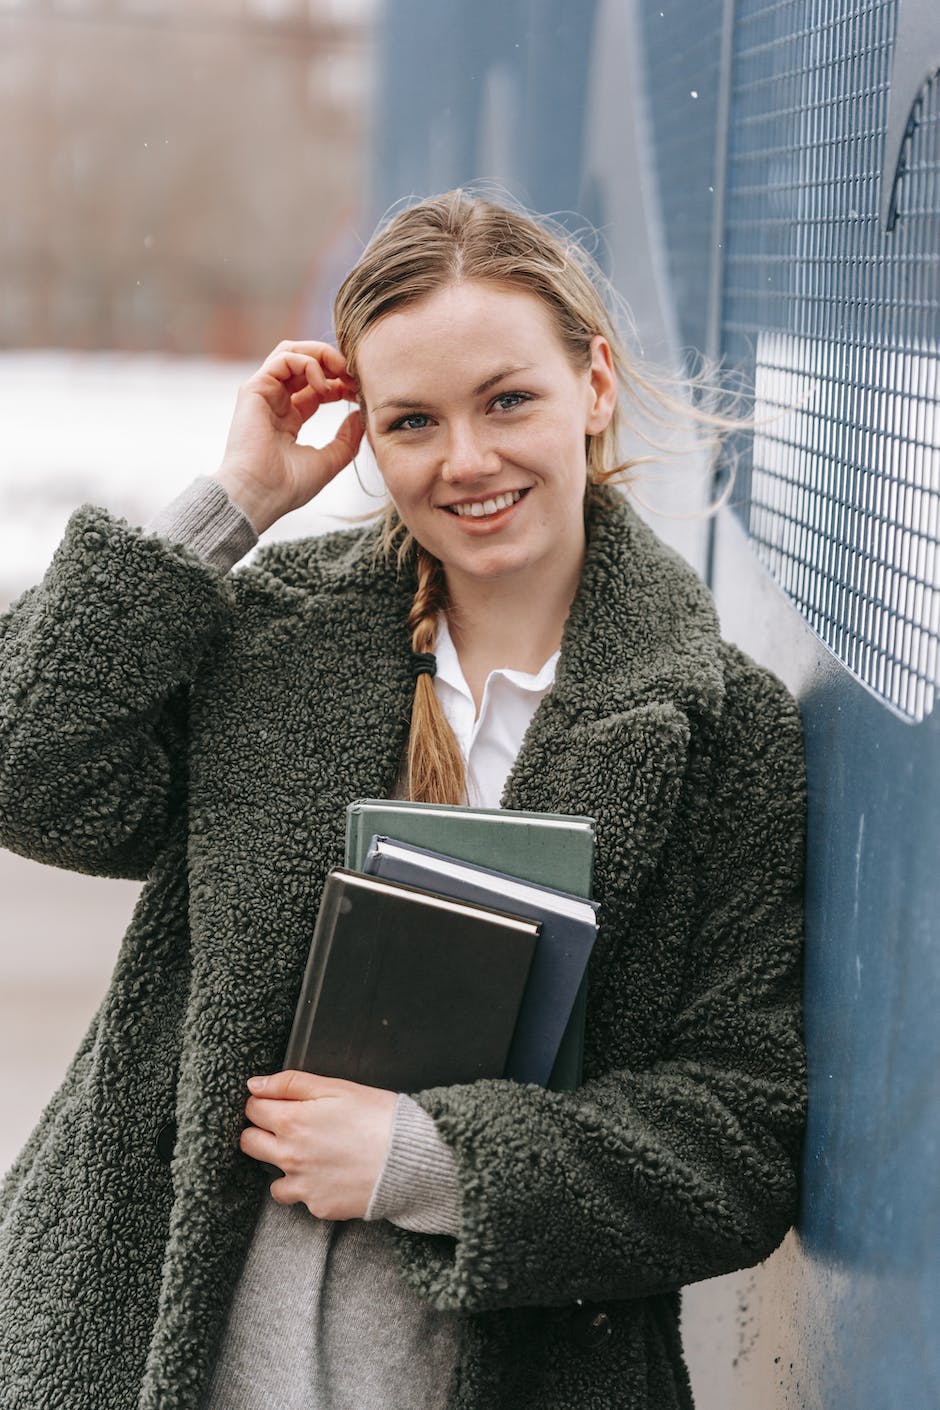 Smiling young lady with textbooks looking at camera against the wall in town on a windy day